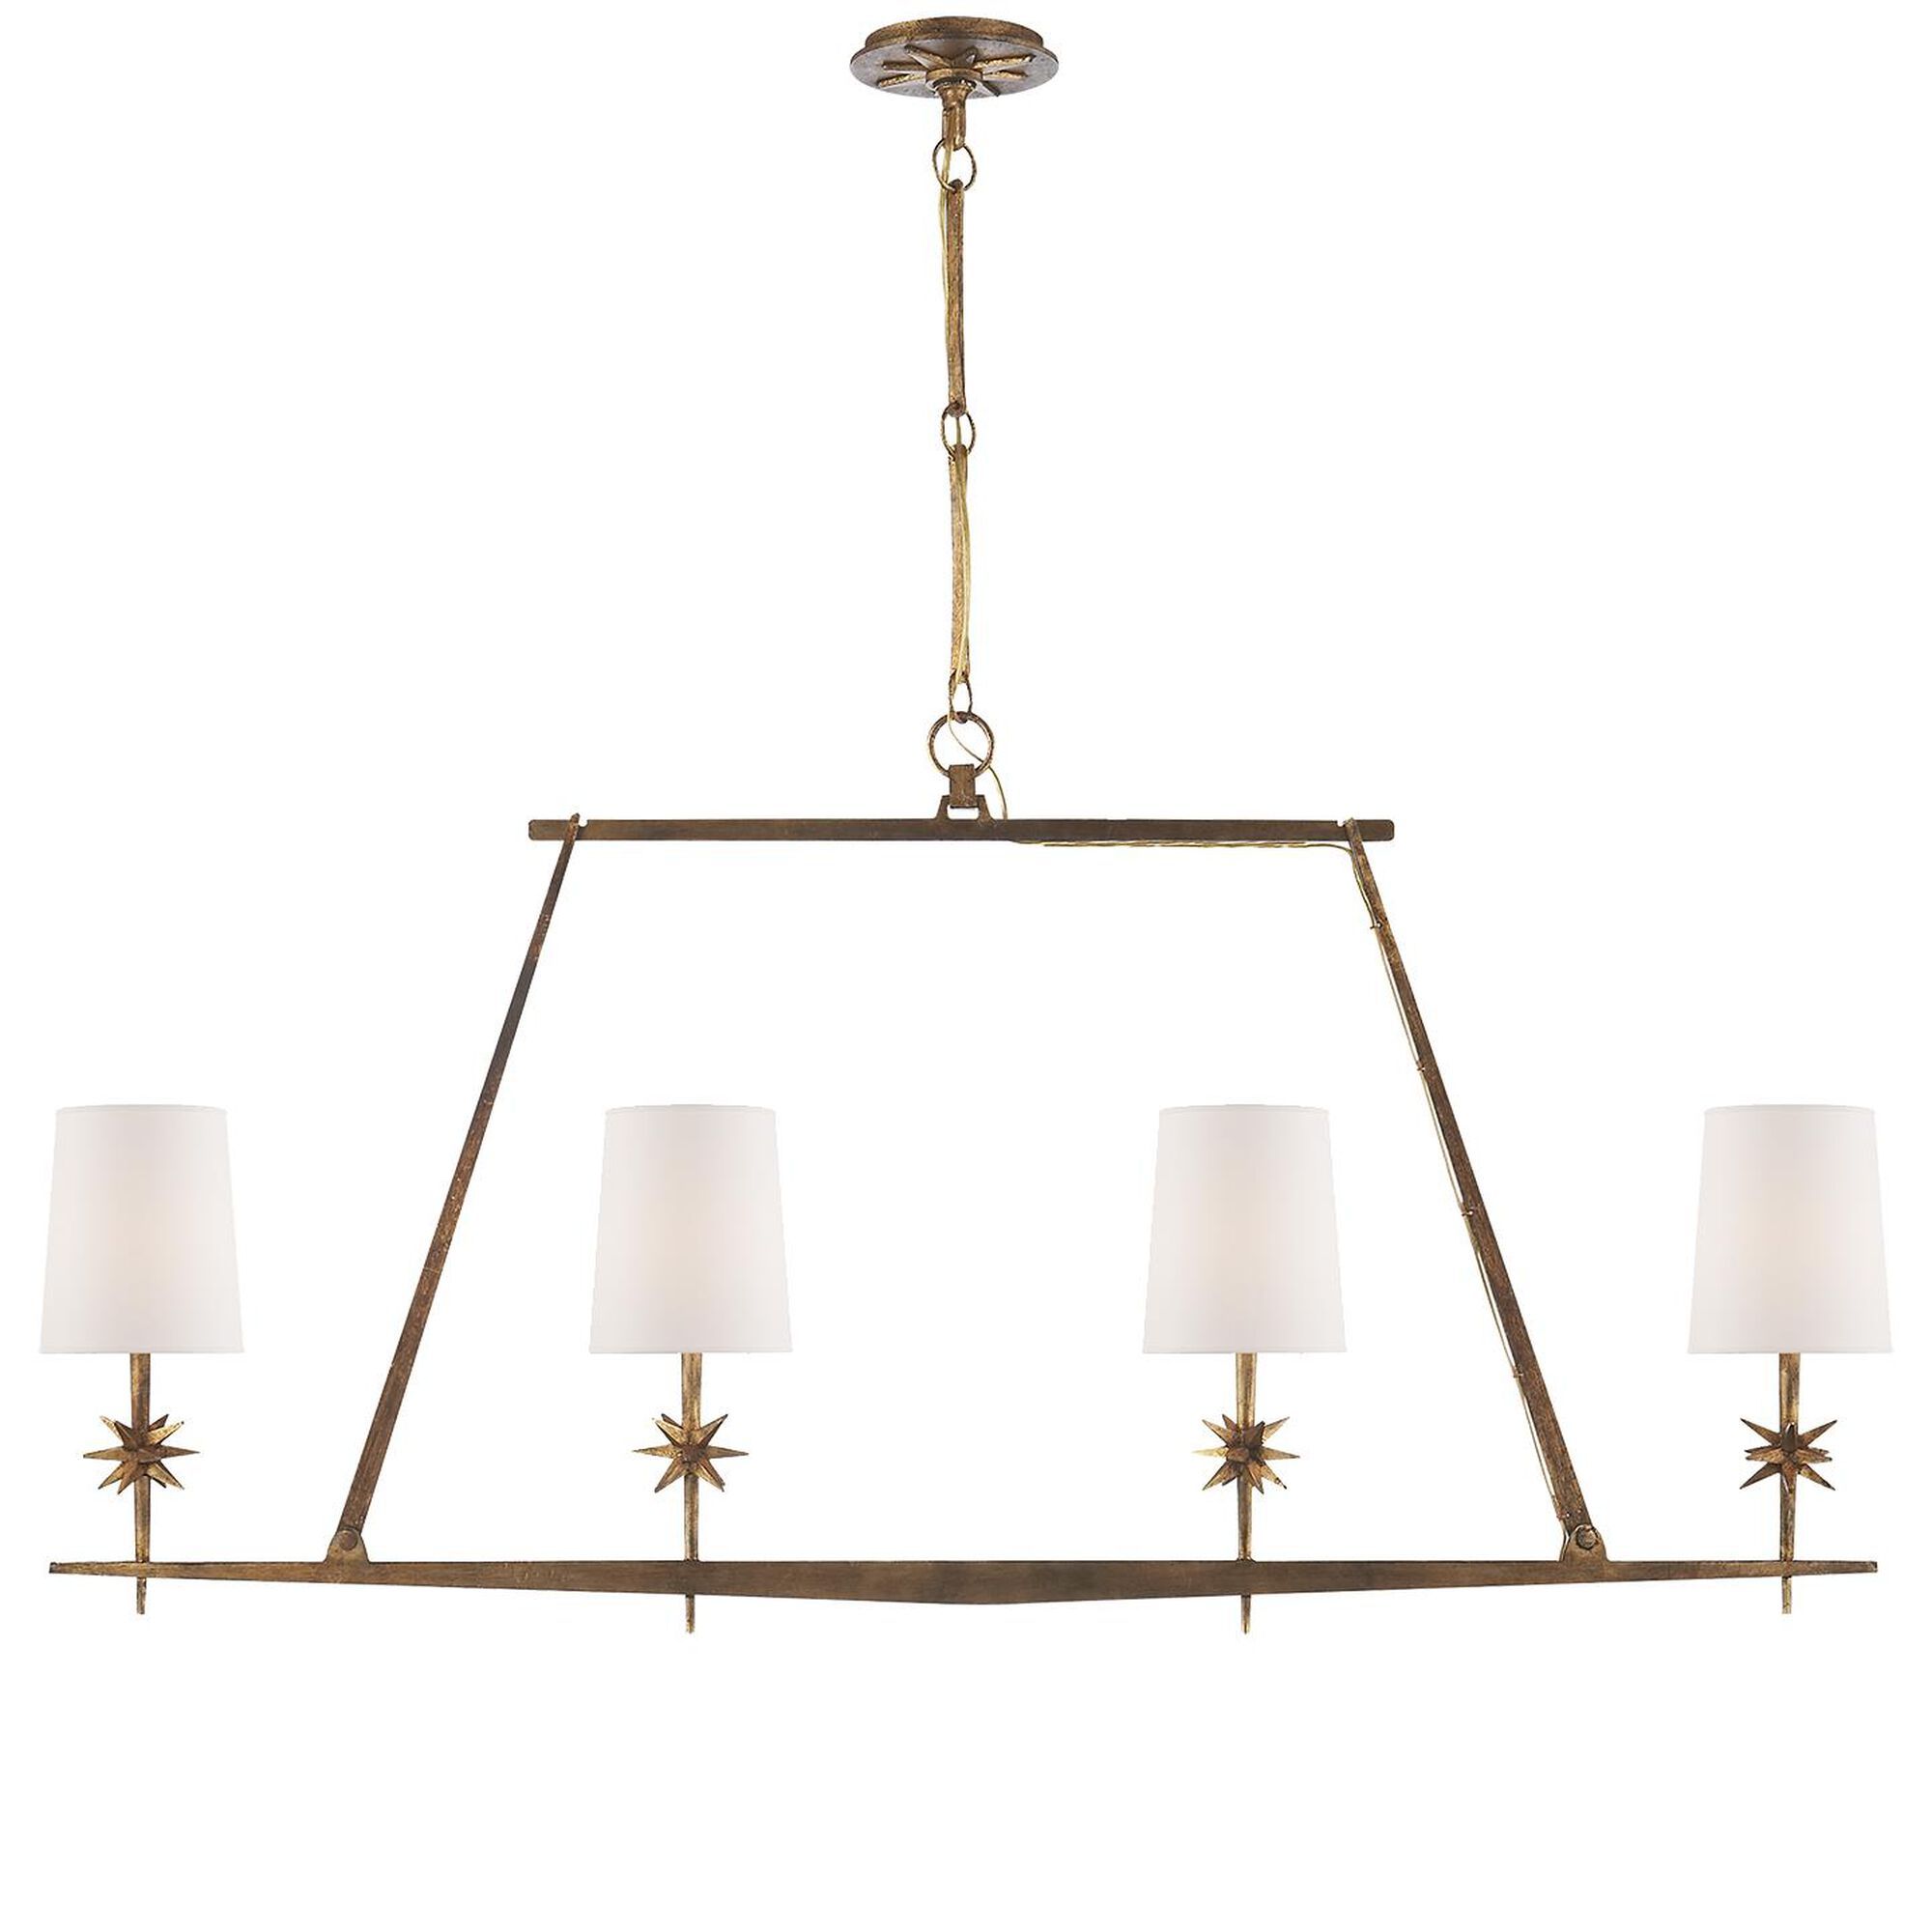 Ian K. Fowler Etoile 48 Inch 4 Light Linear Suspension Light by Visual Comfort and Co. | Capitol Lighting 1800lighting.com